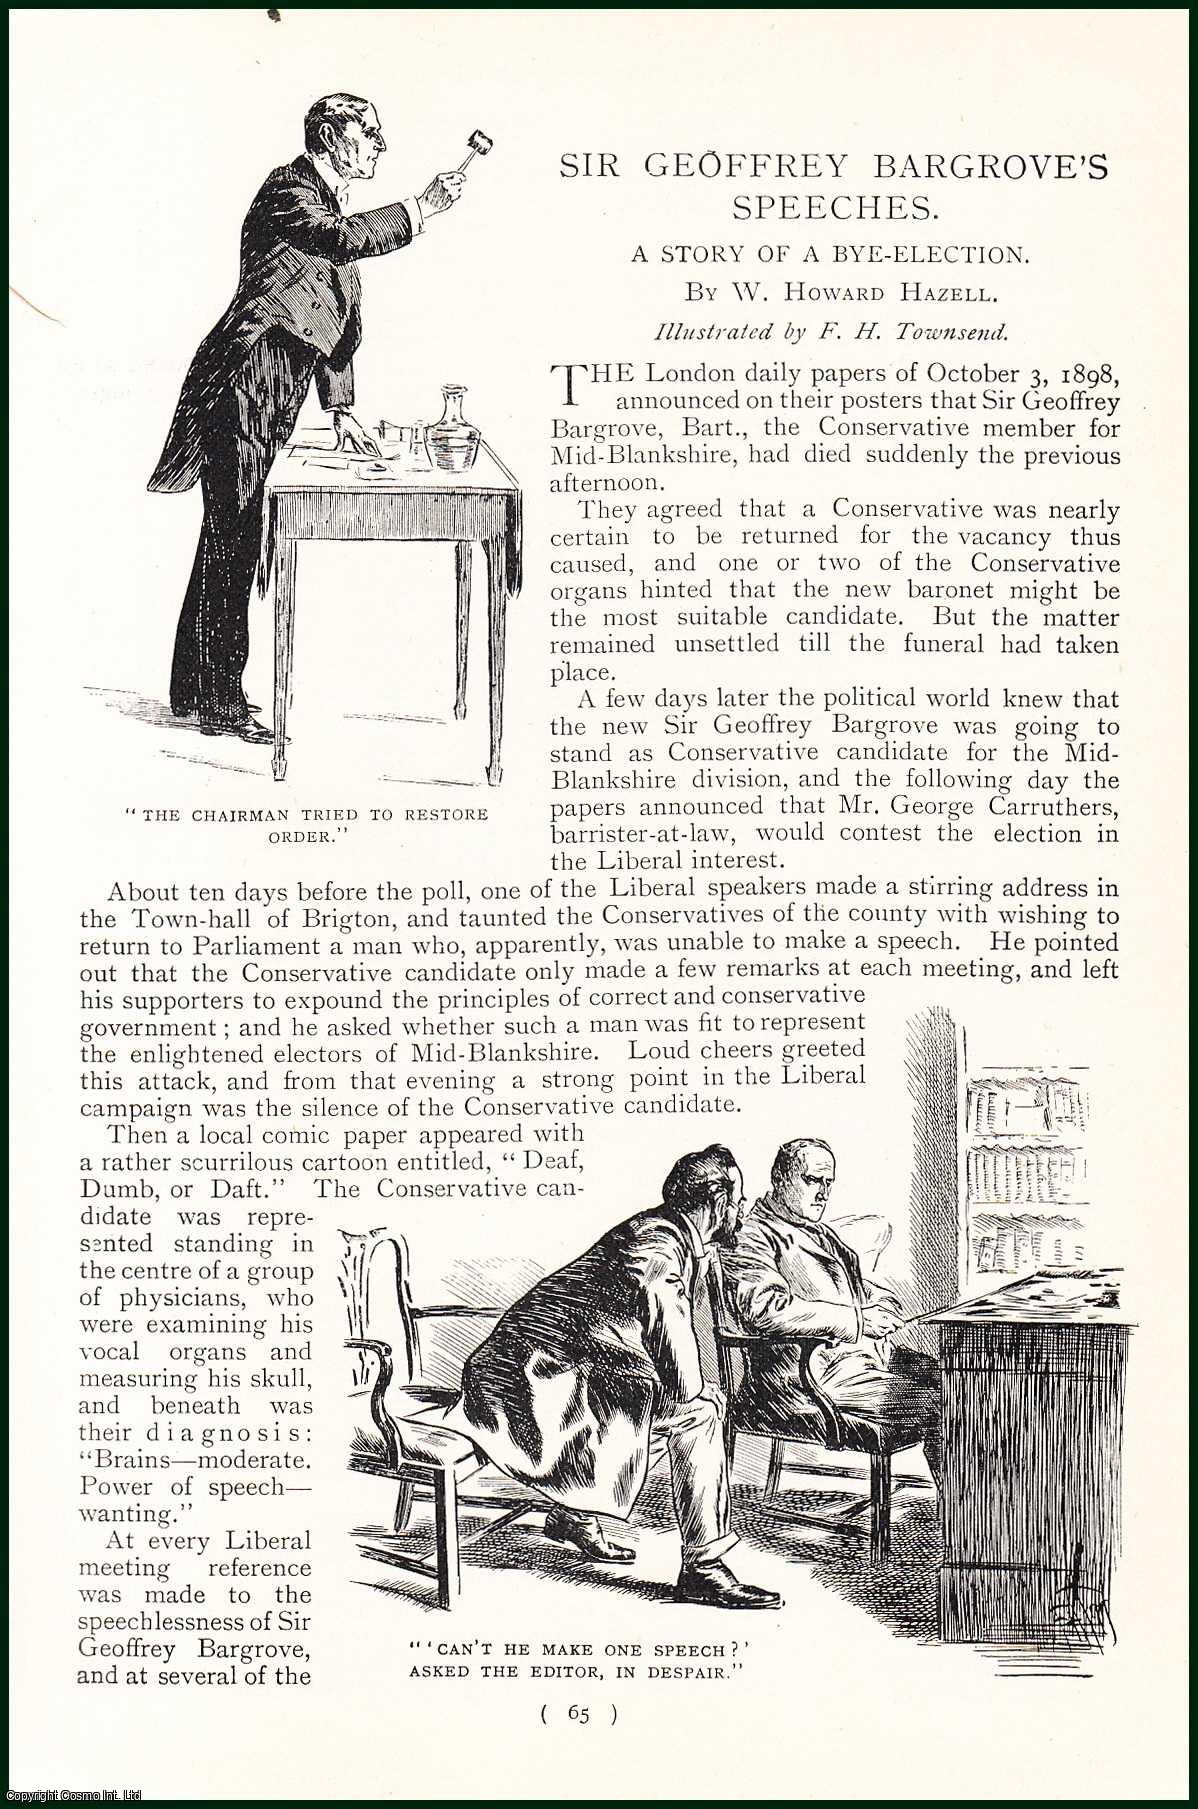 W. Howard Hazell, illustrated by F.H. Townsend. - Sir Geoffrey Bargrove's Speeches. A Story of a Bye-Election. An uncommon original article from the Harmsworth London Magazine, 1900.